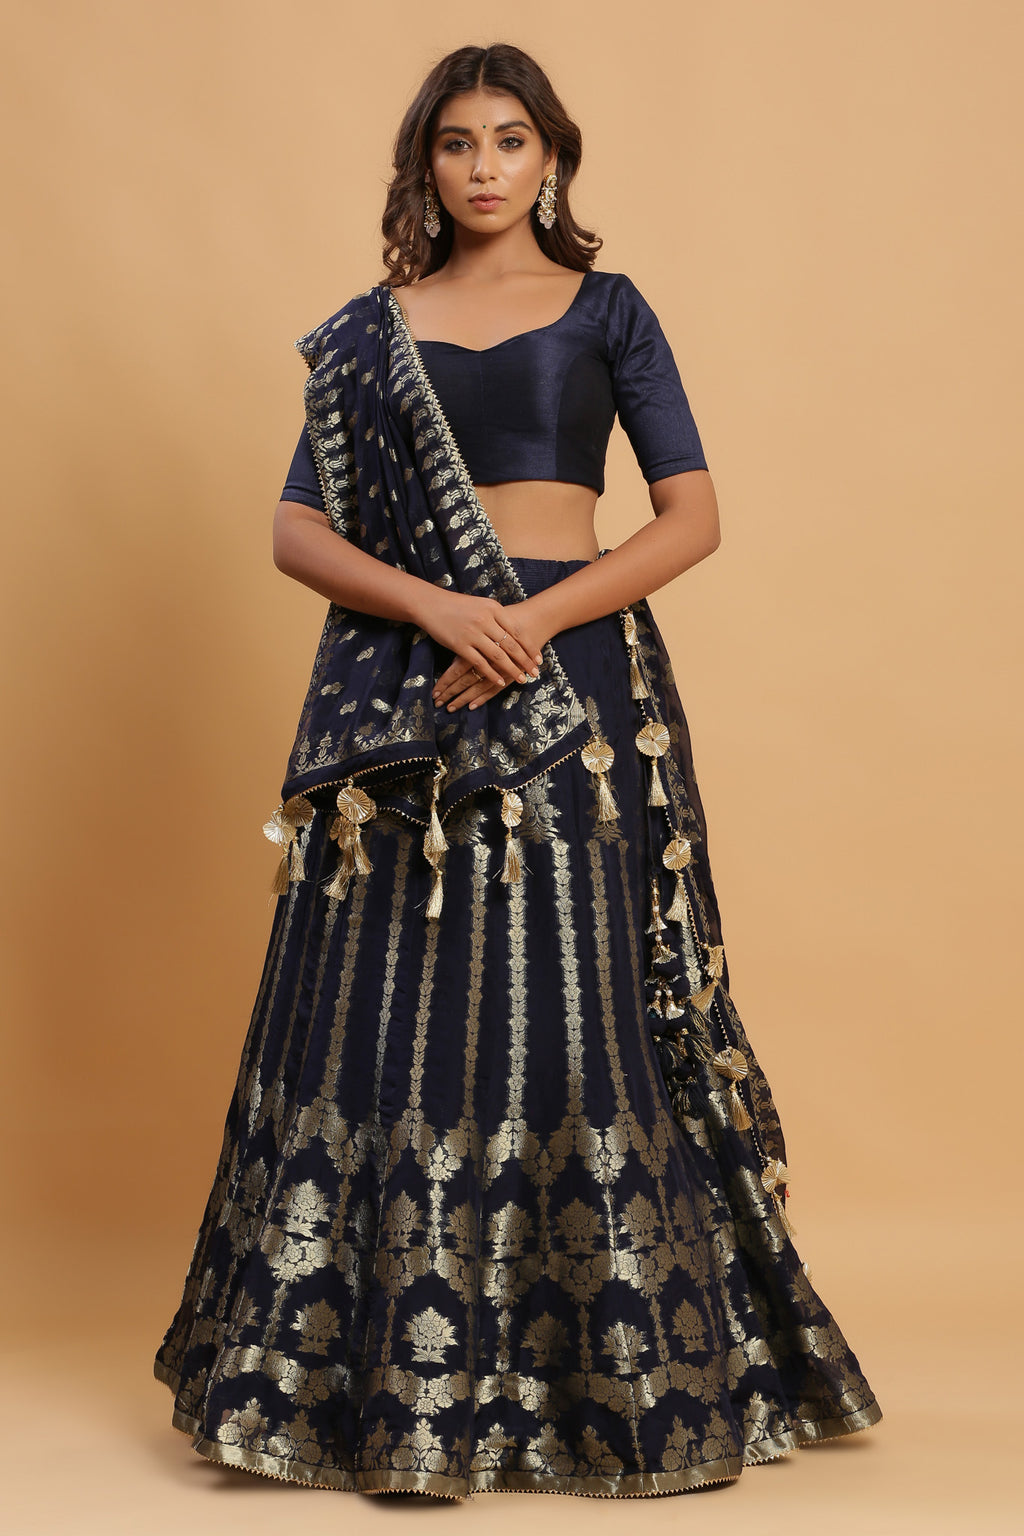 Shop navy zari embroidered lehenga with attached dupatta. It is crafted in silk with intrinsic zari embroidery on the lehenga and solid blouse tassels on a dupatta, with beautiful heavy tassels attached to the lehenga. Shop online from Pure Elegance.